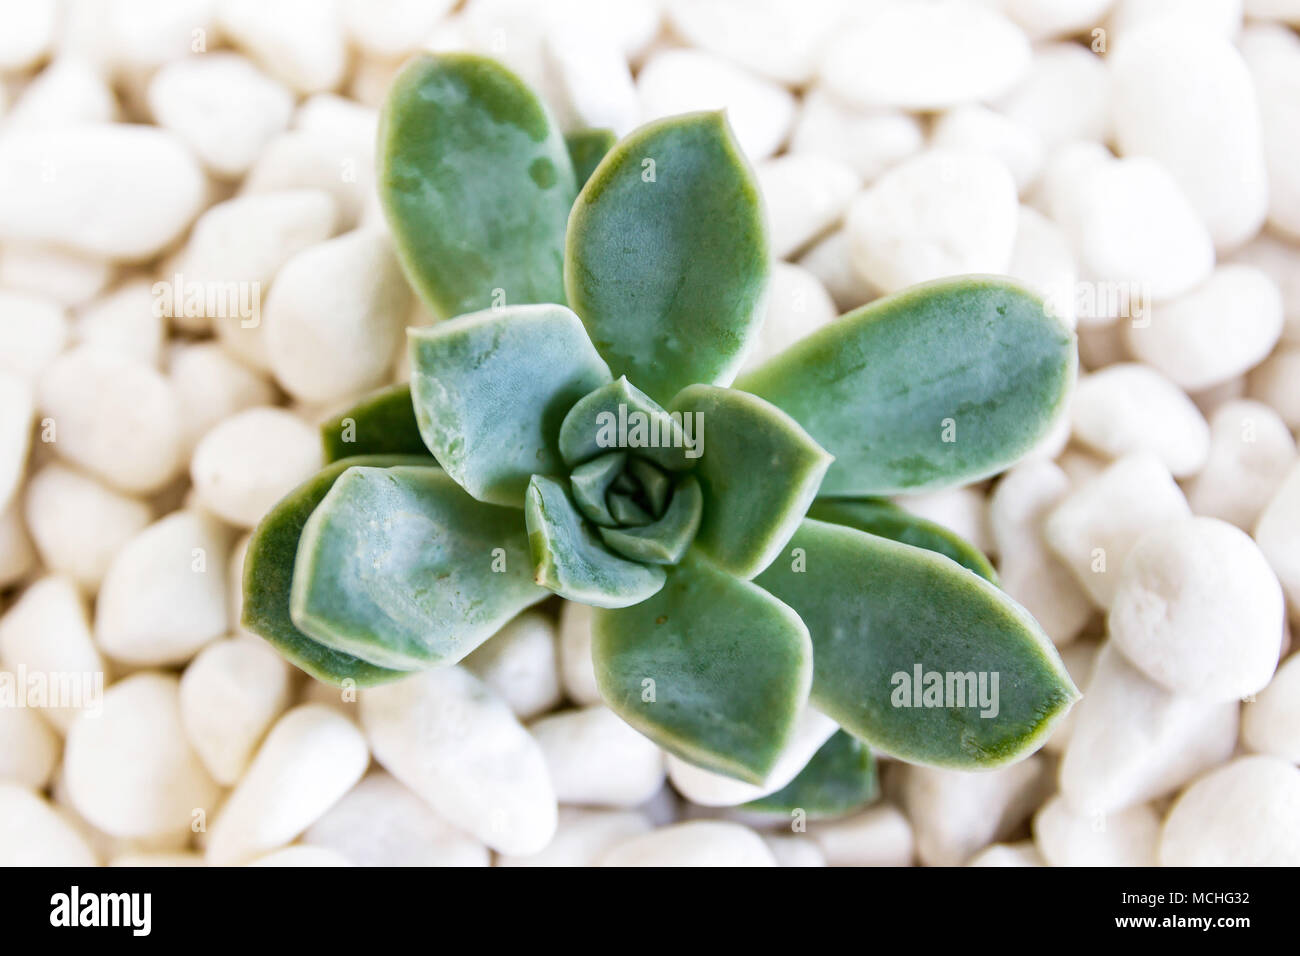 Isolated green succulent on bed of white pebbles Stock Photo